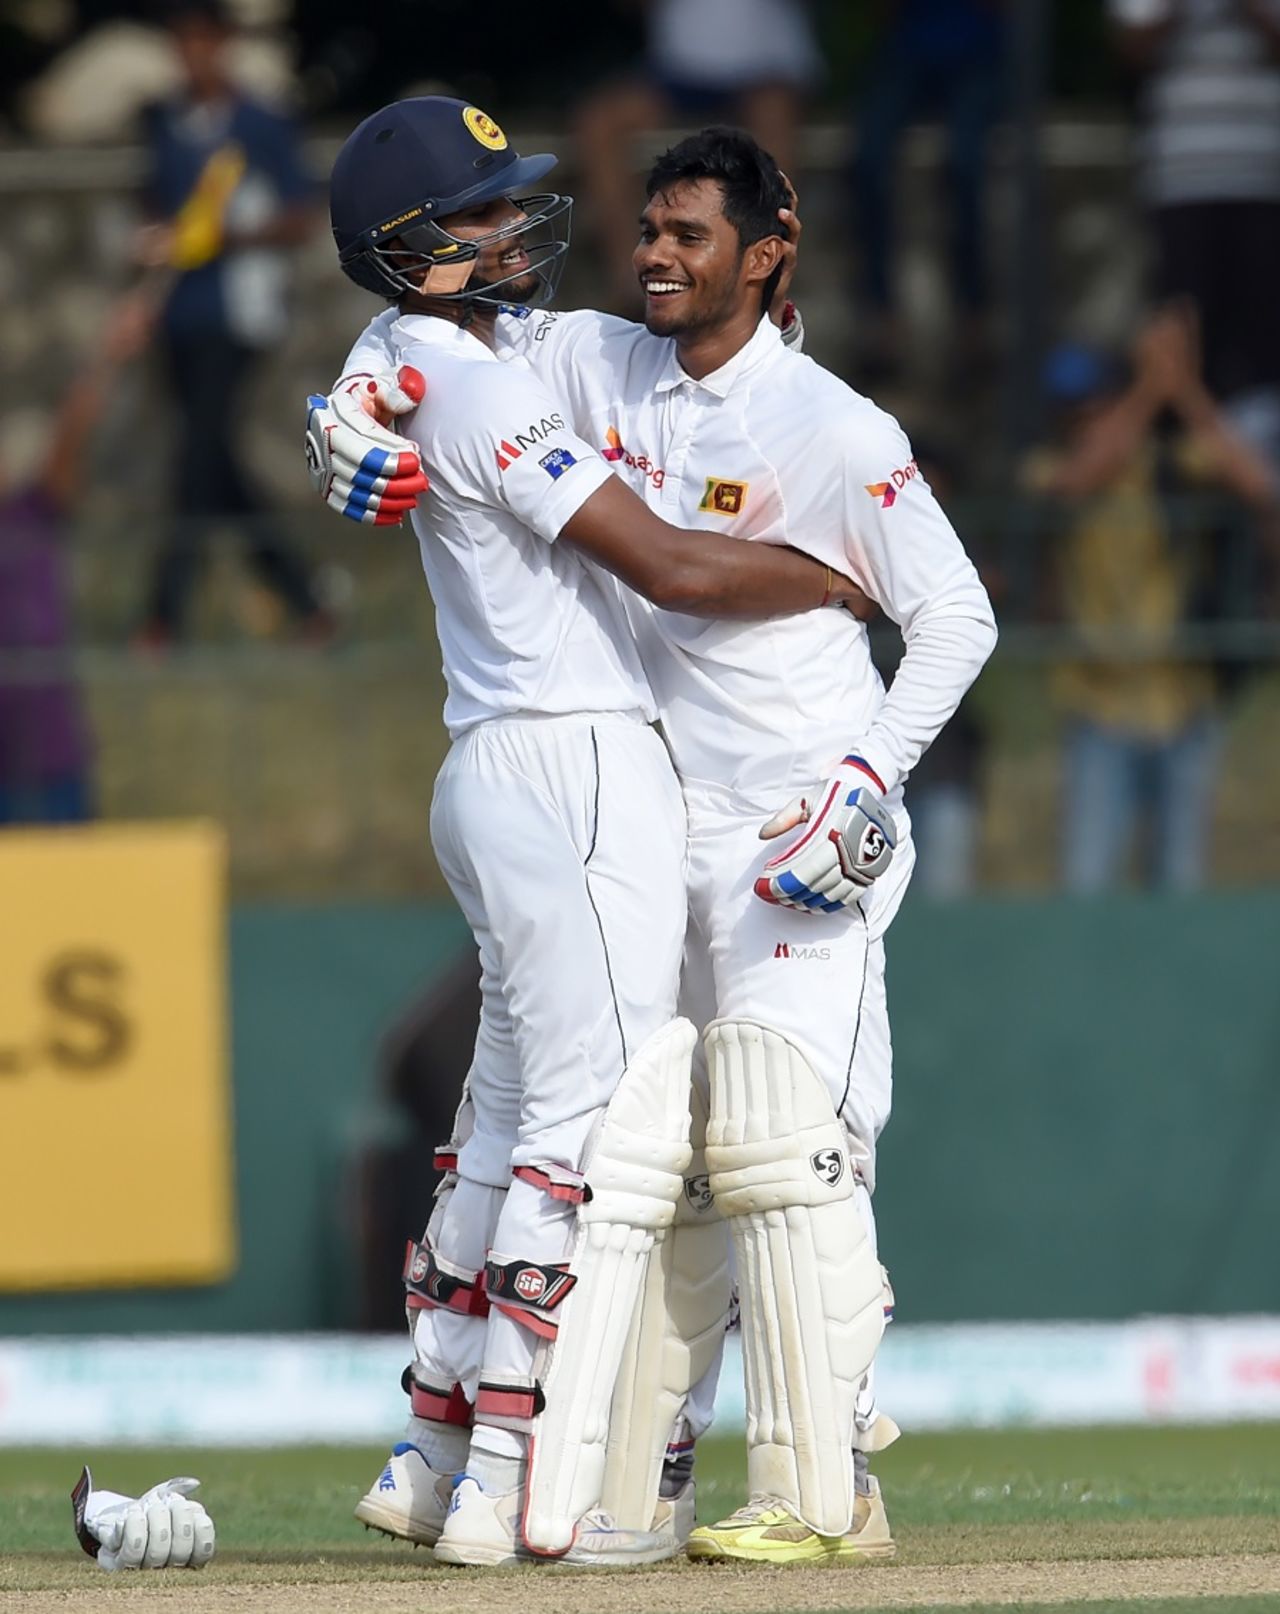 Dhananjaya de Silva is pulled into an embrace by Dinesh Chandimal after raising his maiden Test century, Sri Lanka v Australia, 3rd Test, SSC, 1st day, August 13, 2016